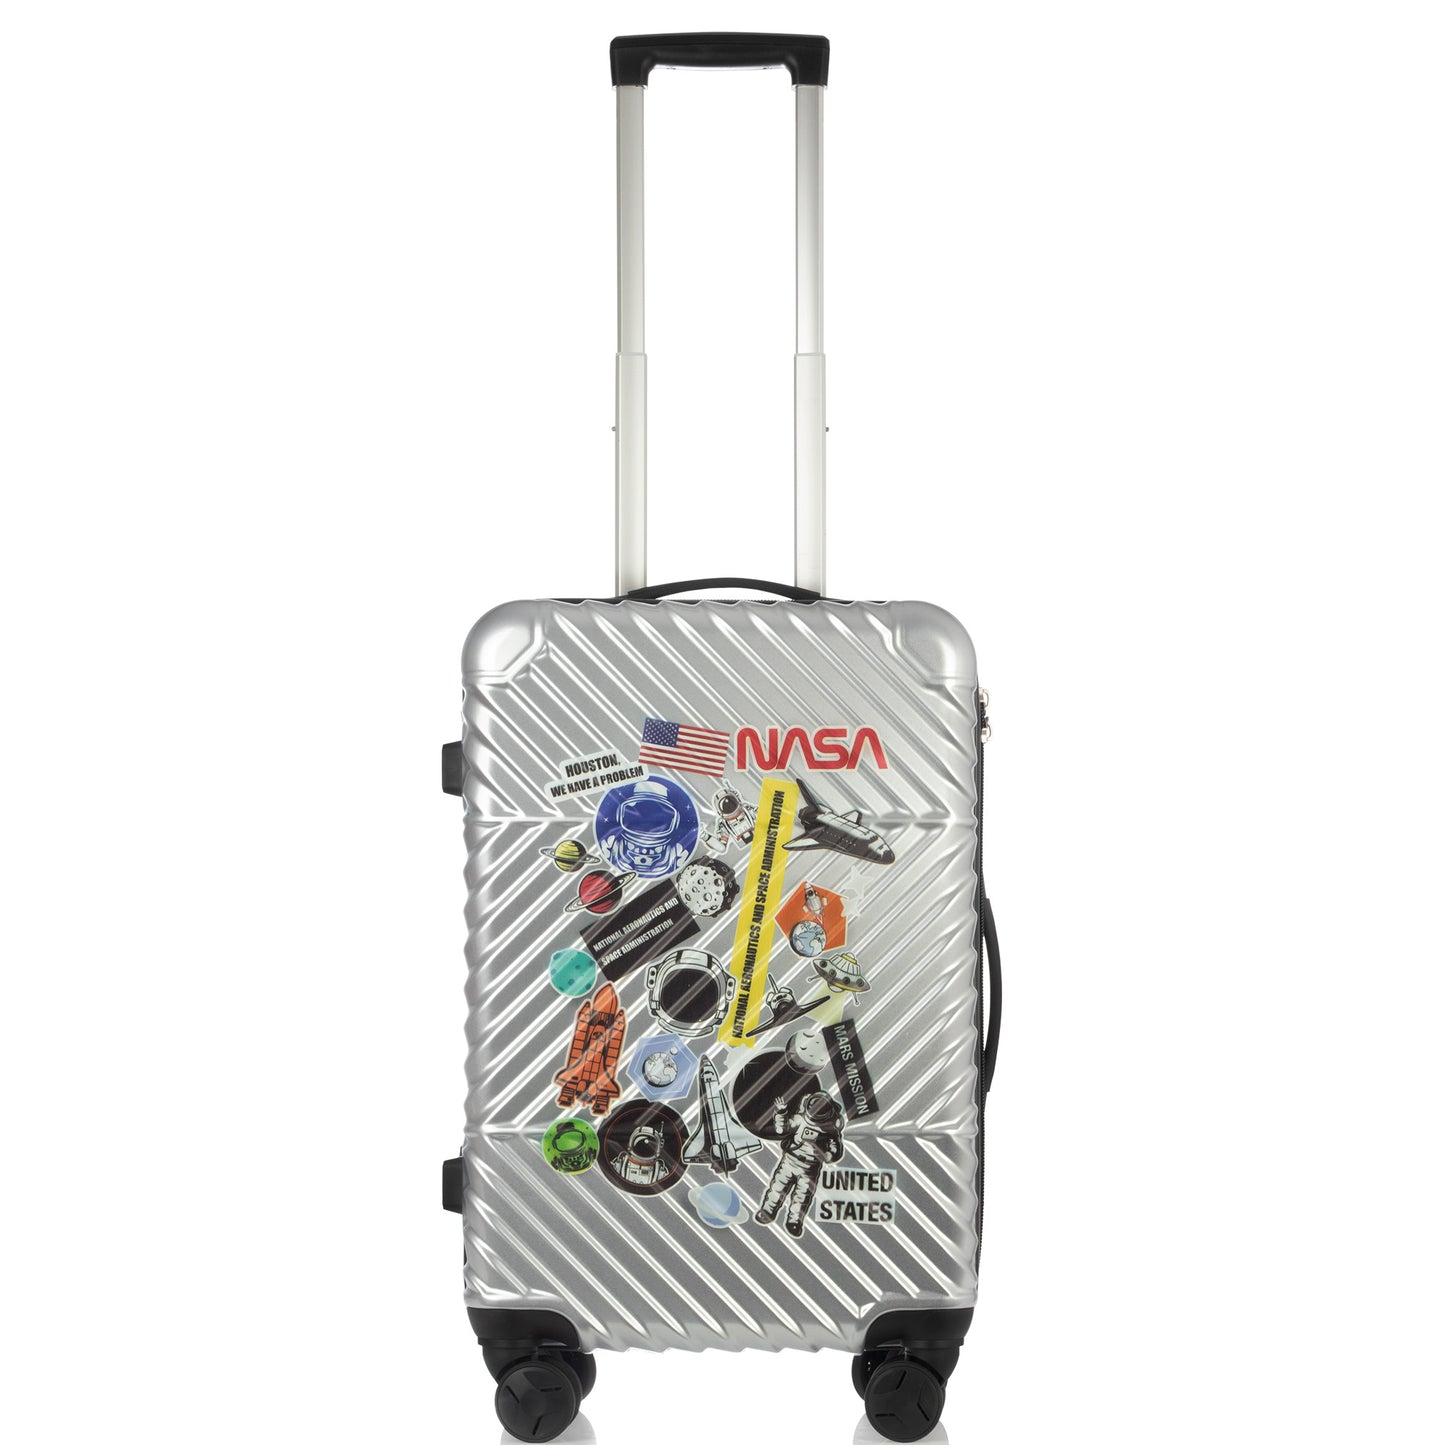 Hardhead Luggage (22/26/30") Suitcase Lock Spinner Hardshell Space Shuttle Collection Silver